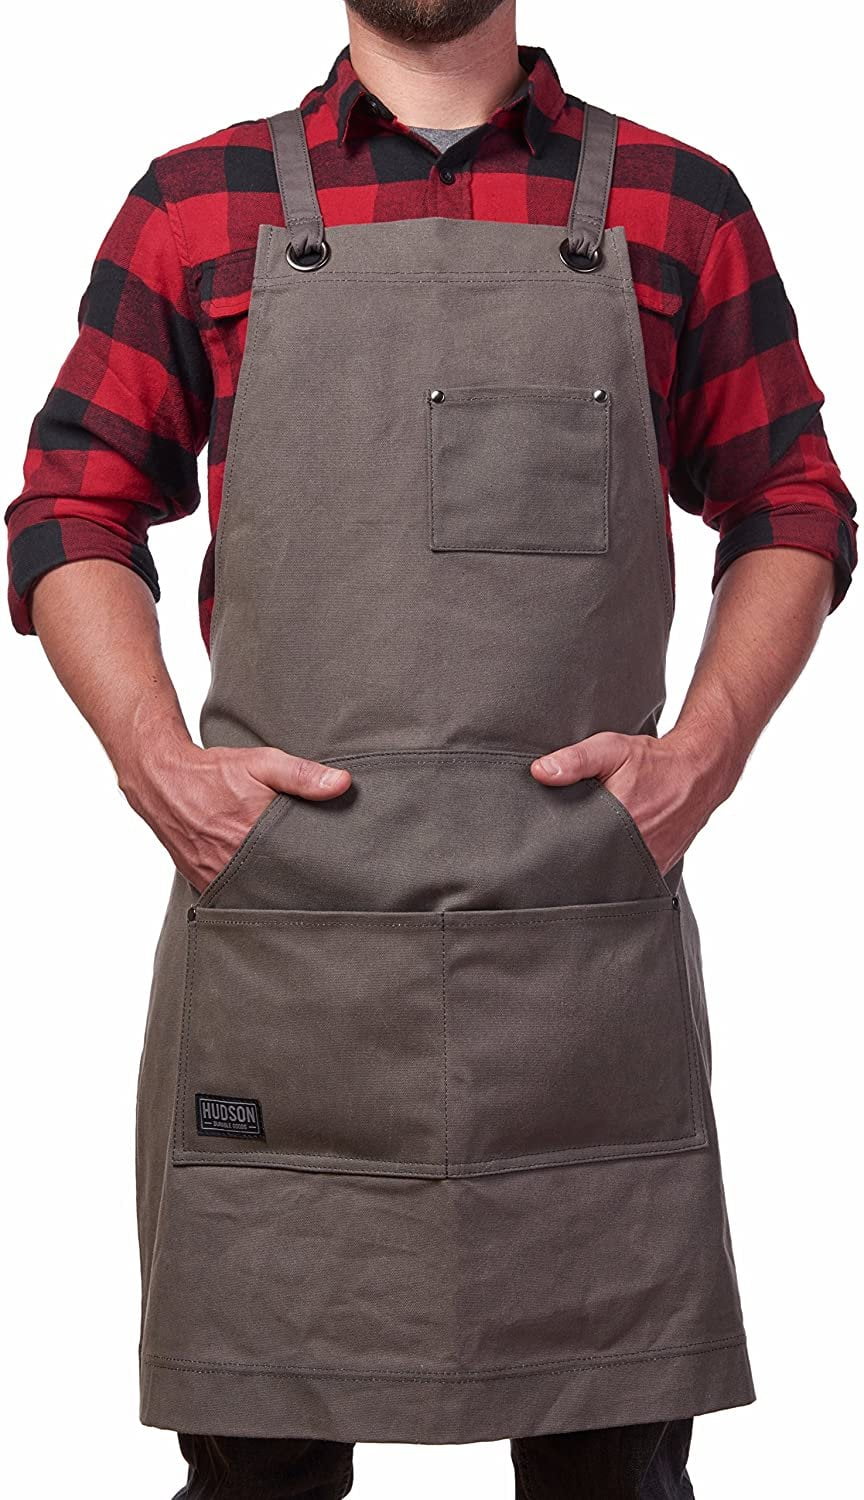 HLDUYIN Durable Work Cowboy Aprons for Men Or Women Waxed Canvas Apron with Pockets Cross-Back Straps for Adjustable Sizes From S To XXL,A